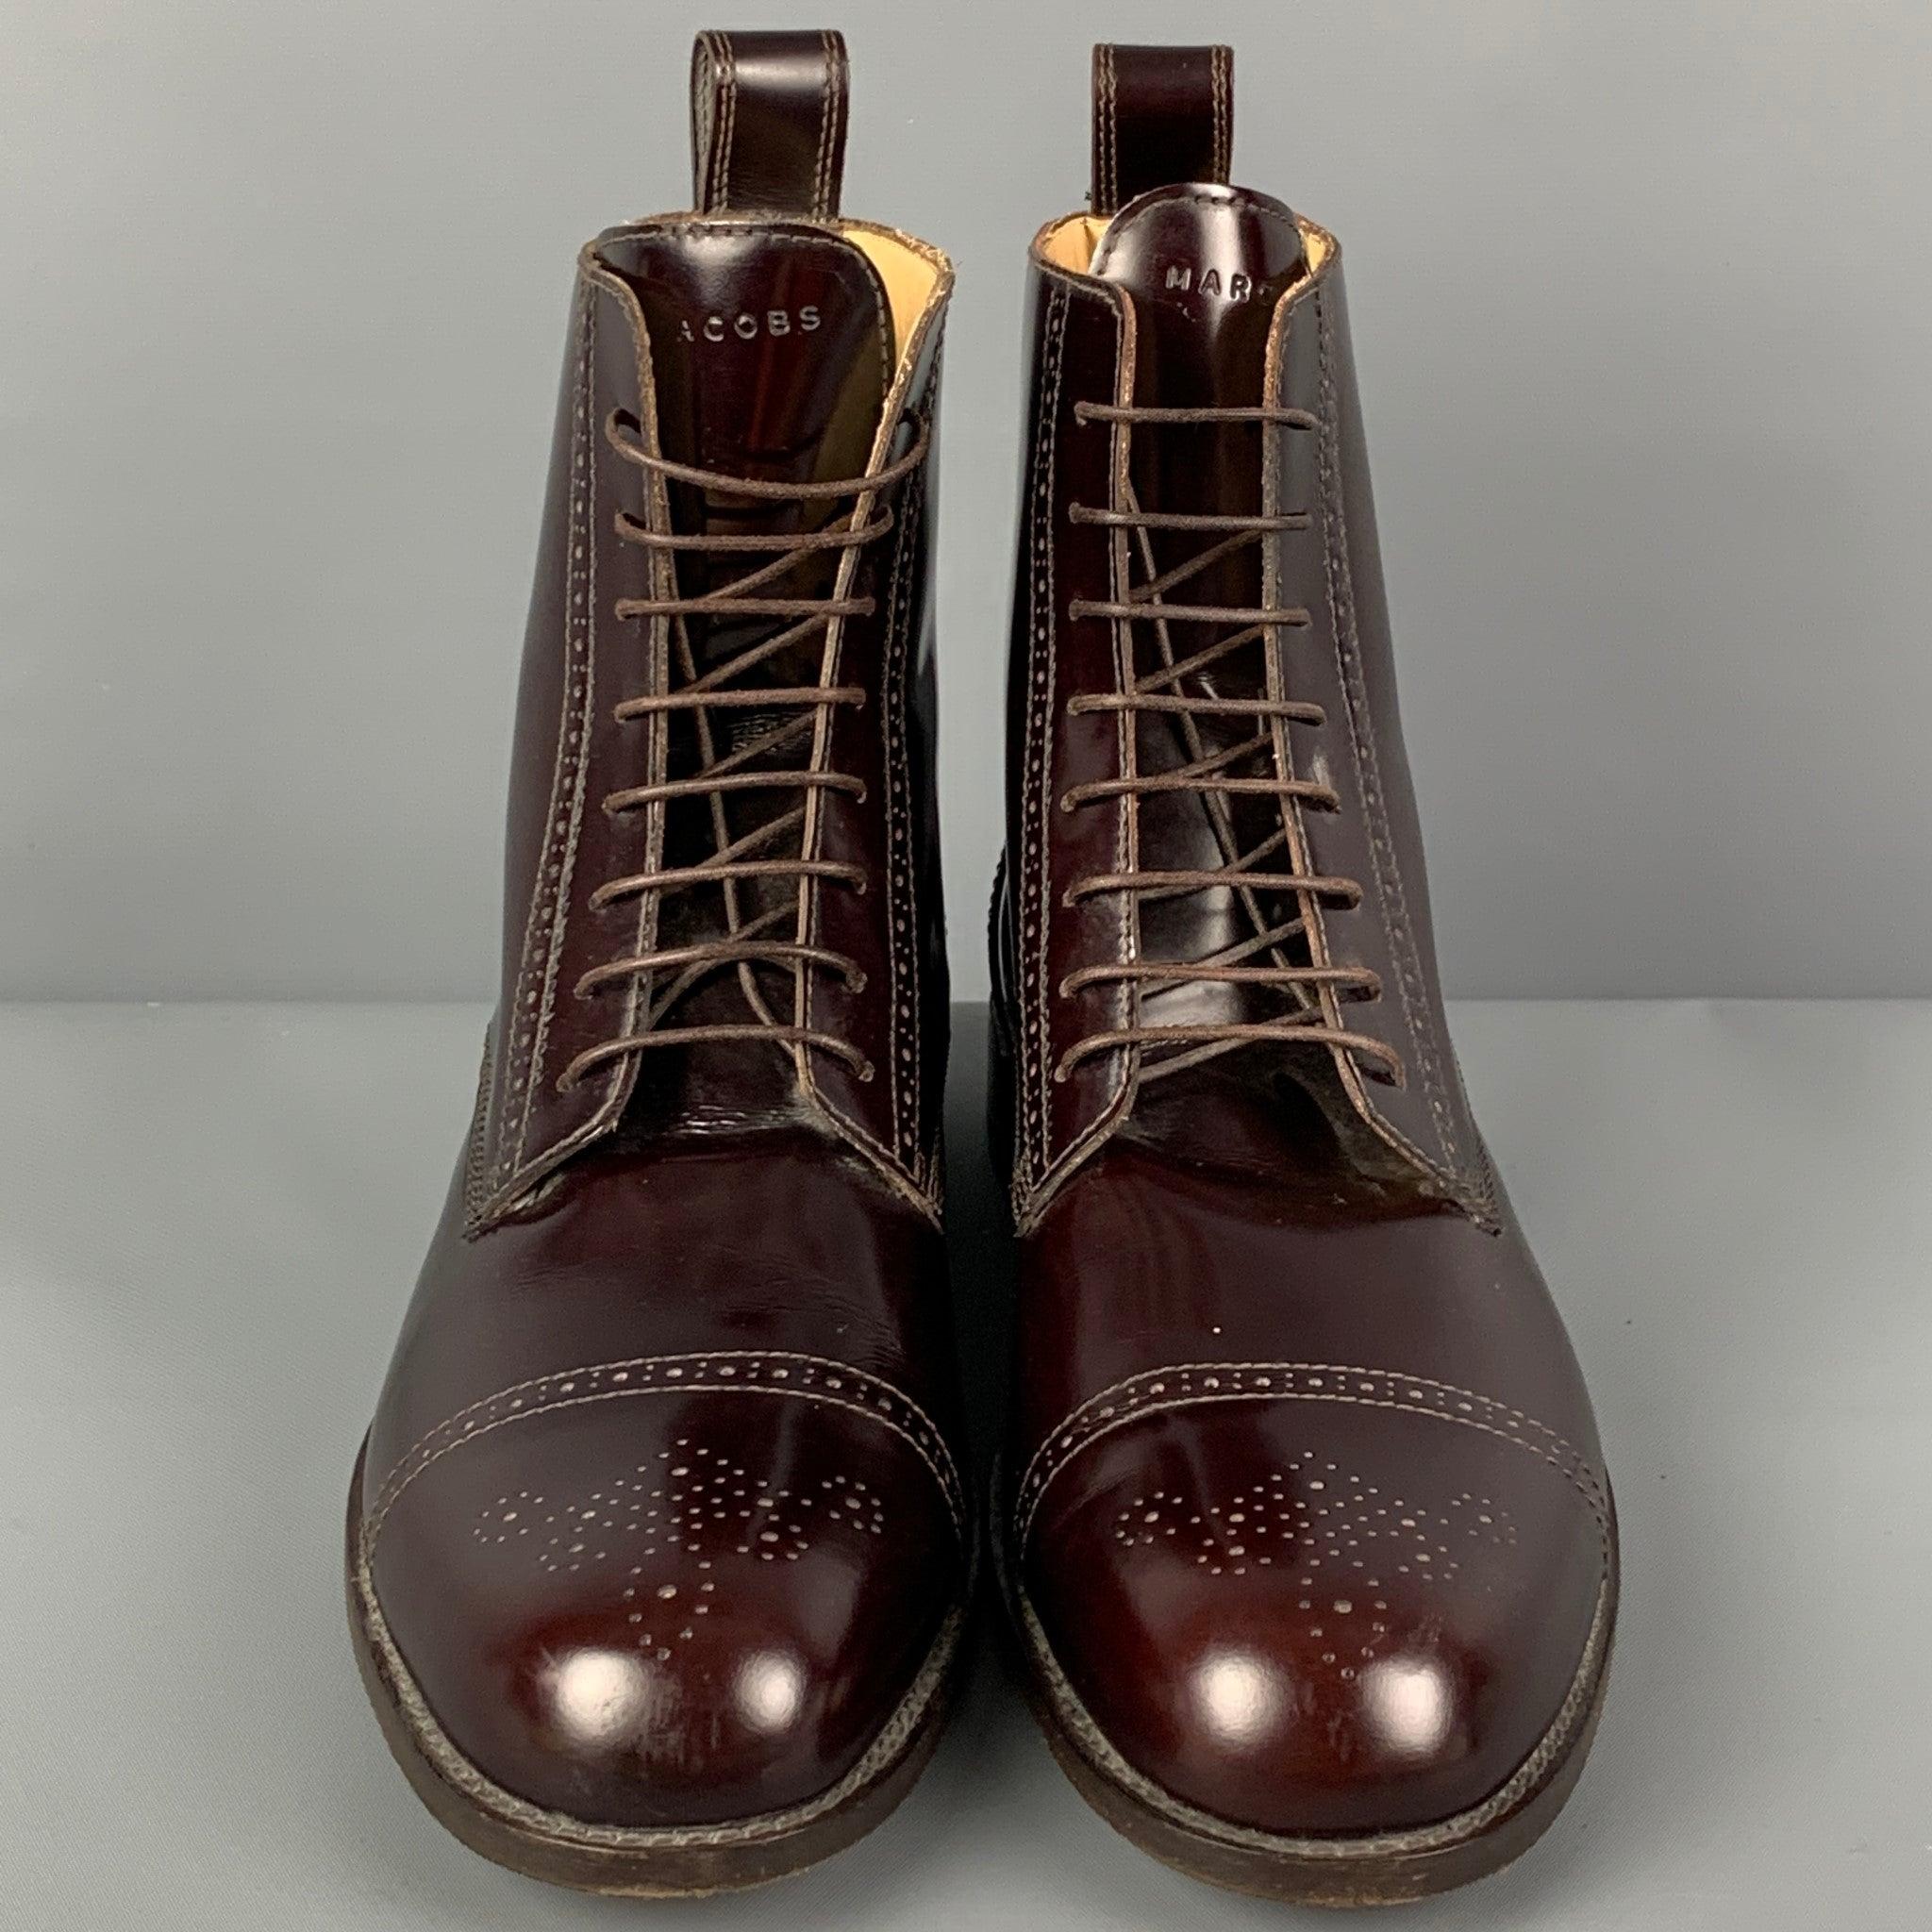 Men's MARC JACOBS Size 9.5 Burgundy Perforated Leather Cap Toe Boots For Sale